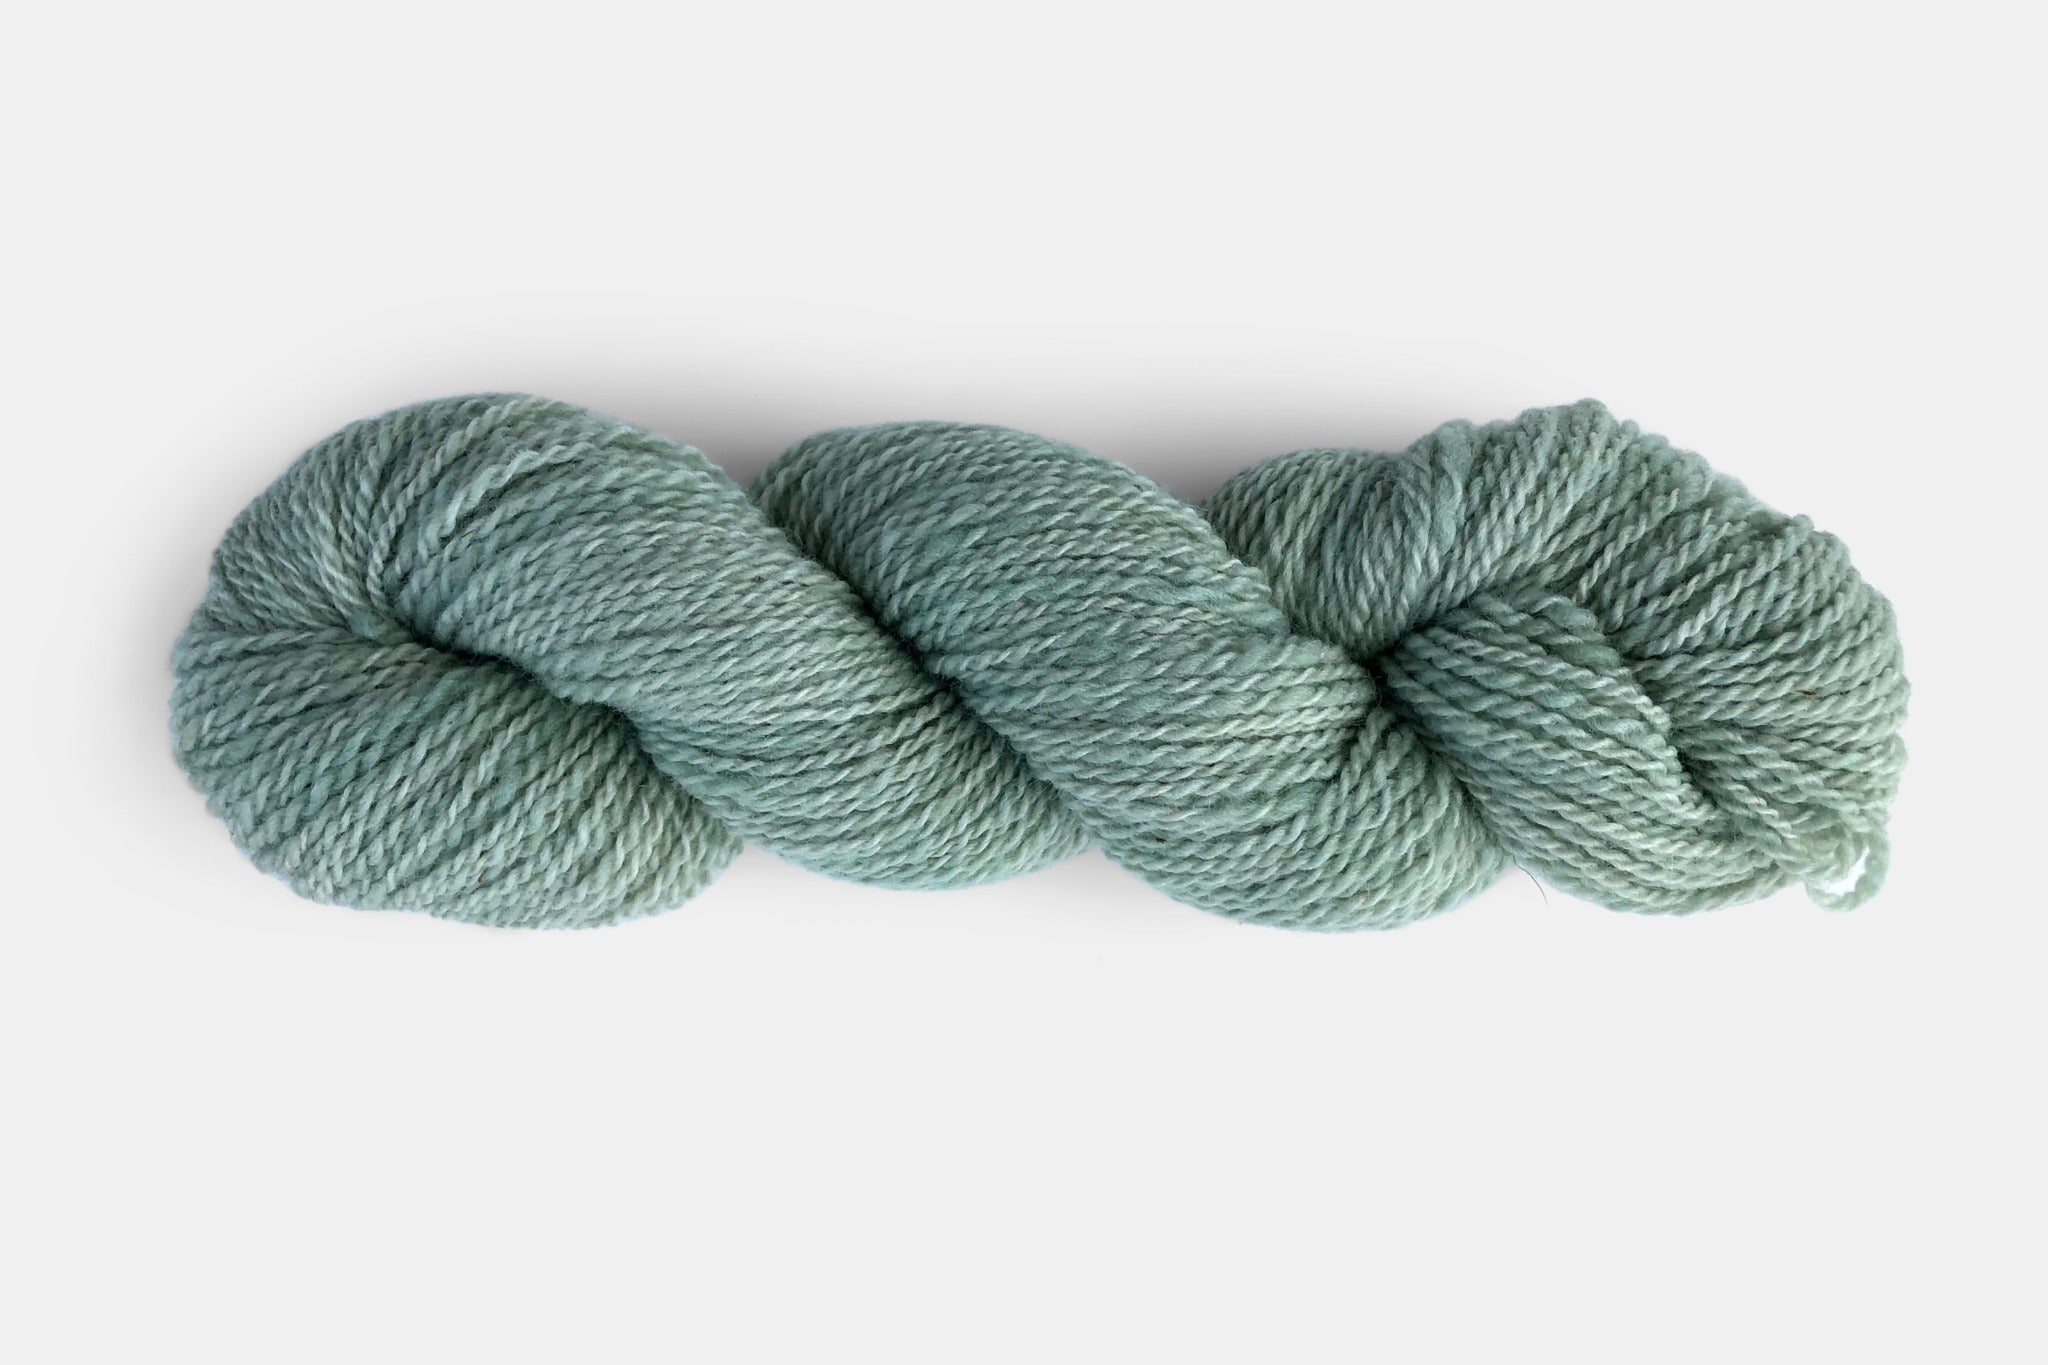 Fleece and Harmony Selkirk Worsted in Lichen